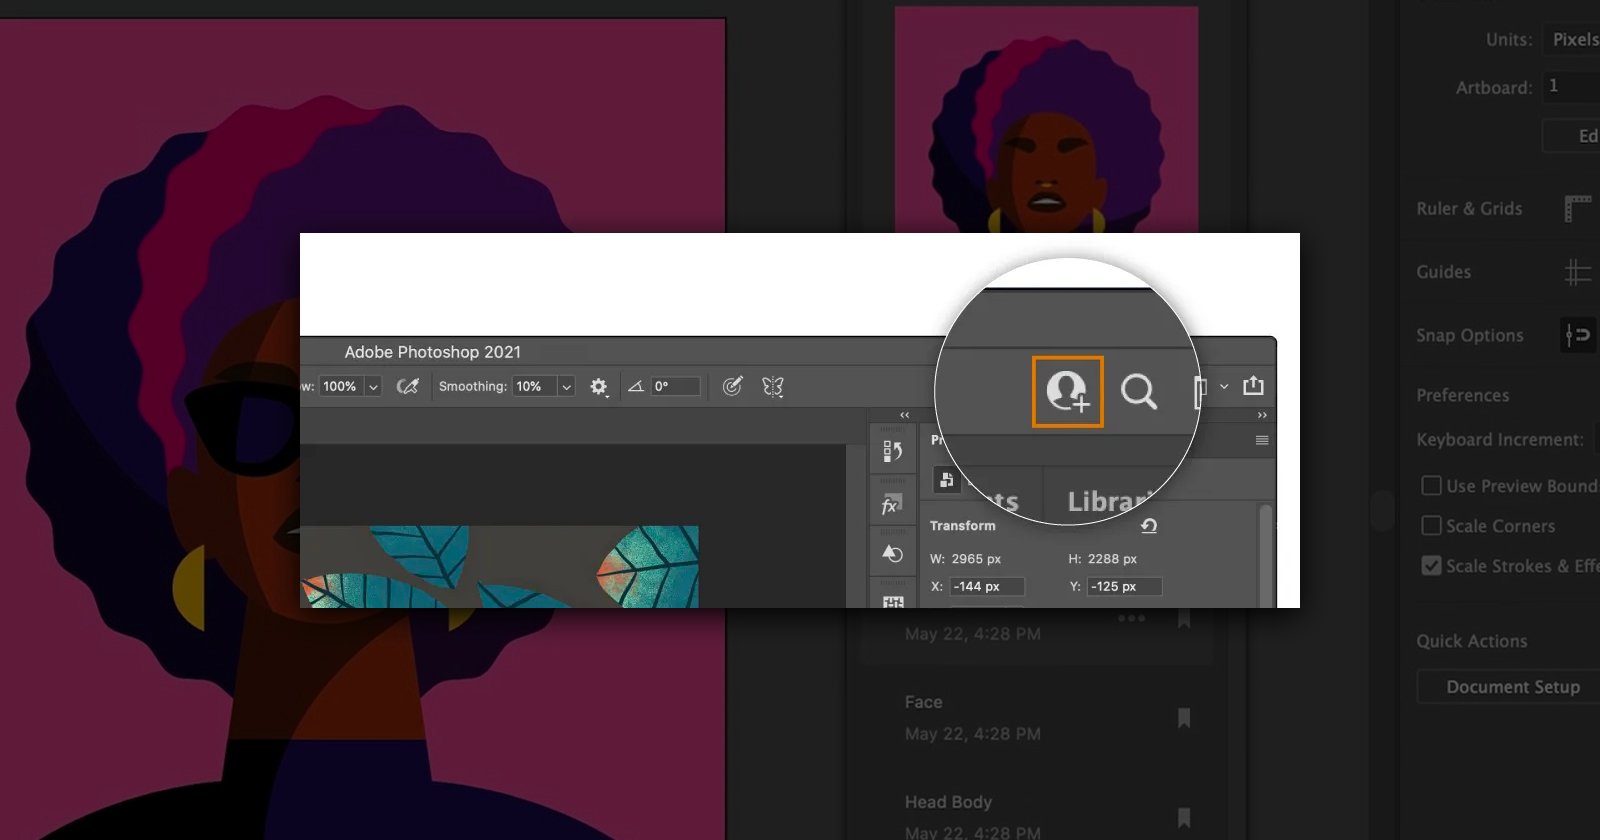 Adobe adds easy collaboration, asynchronous editing to Photoshop